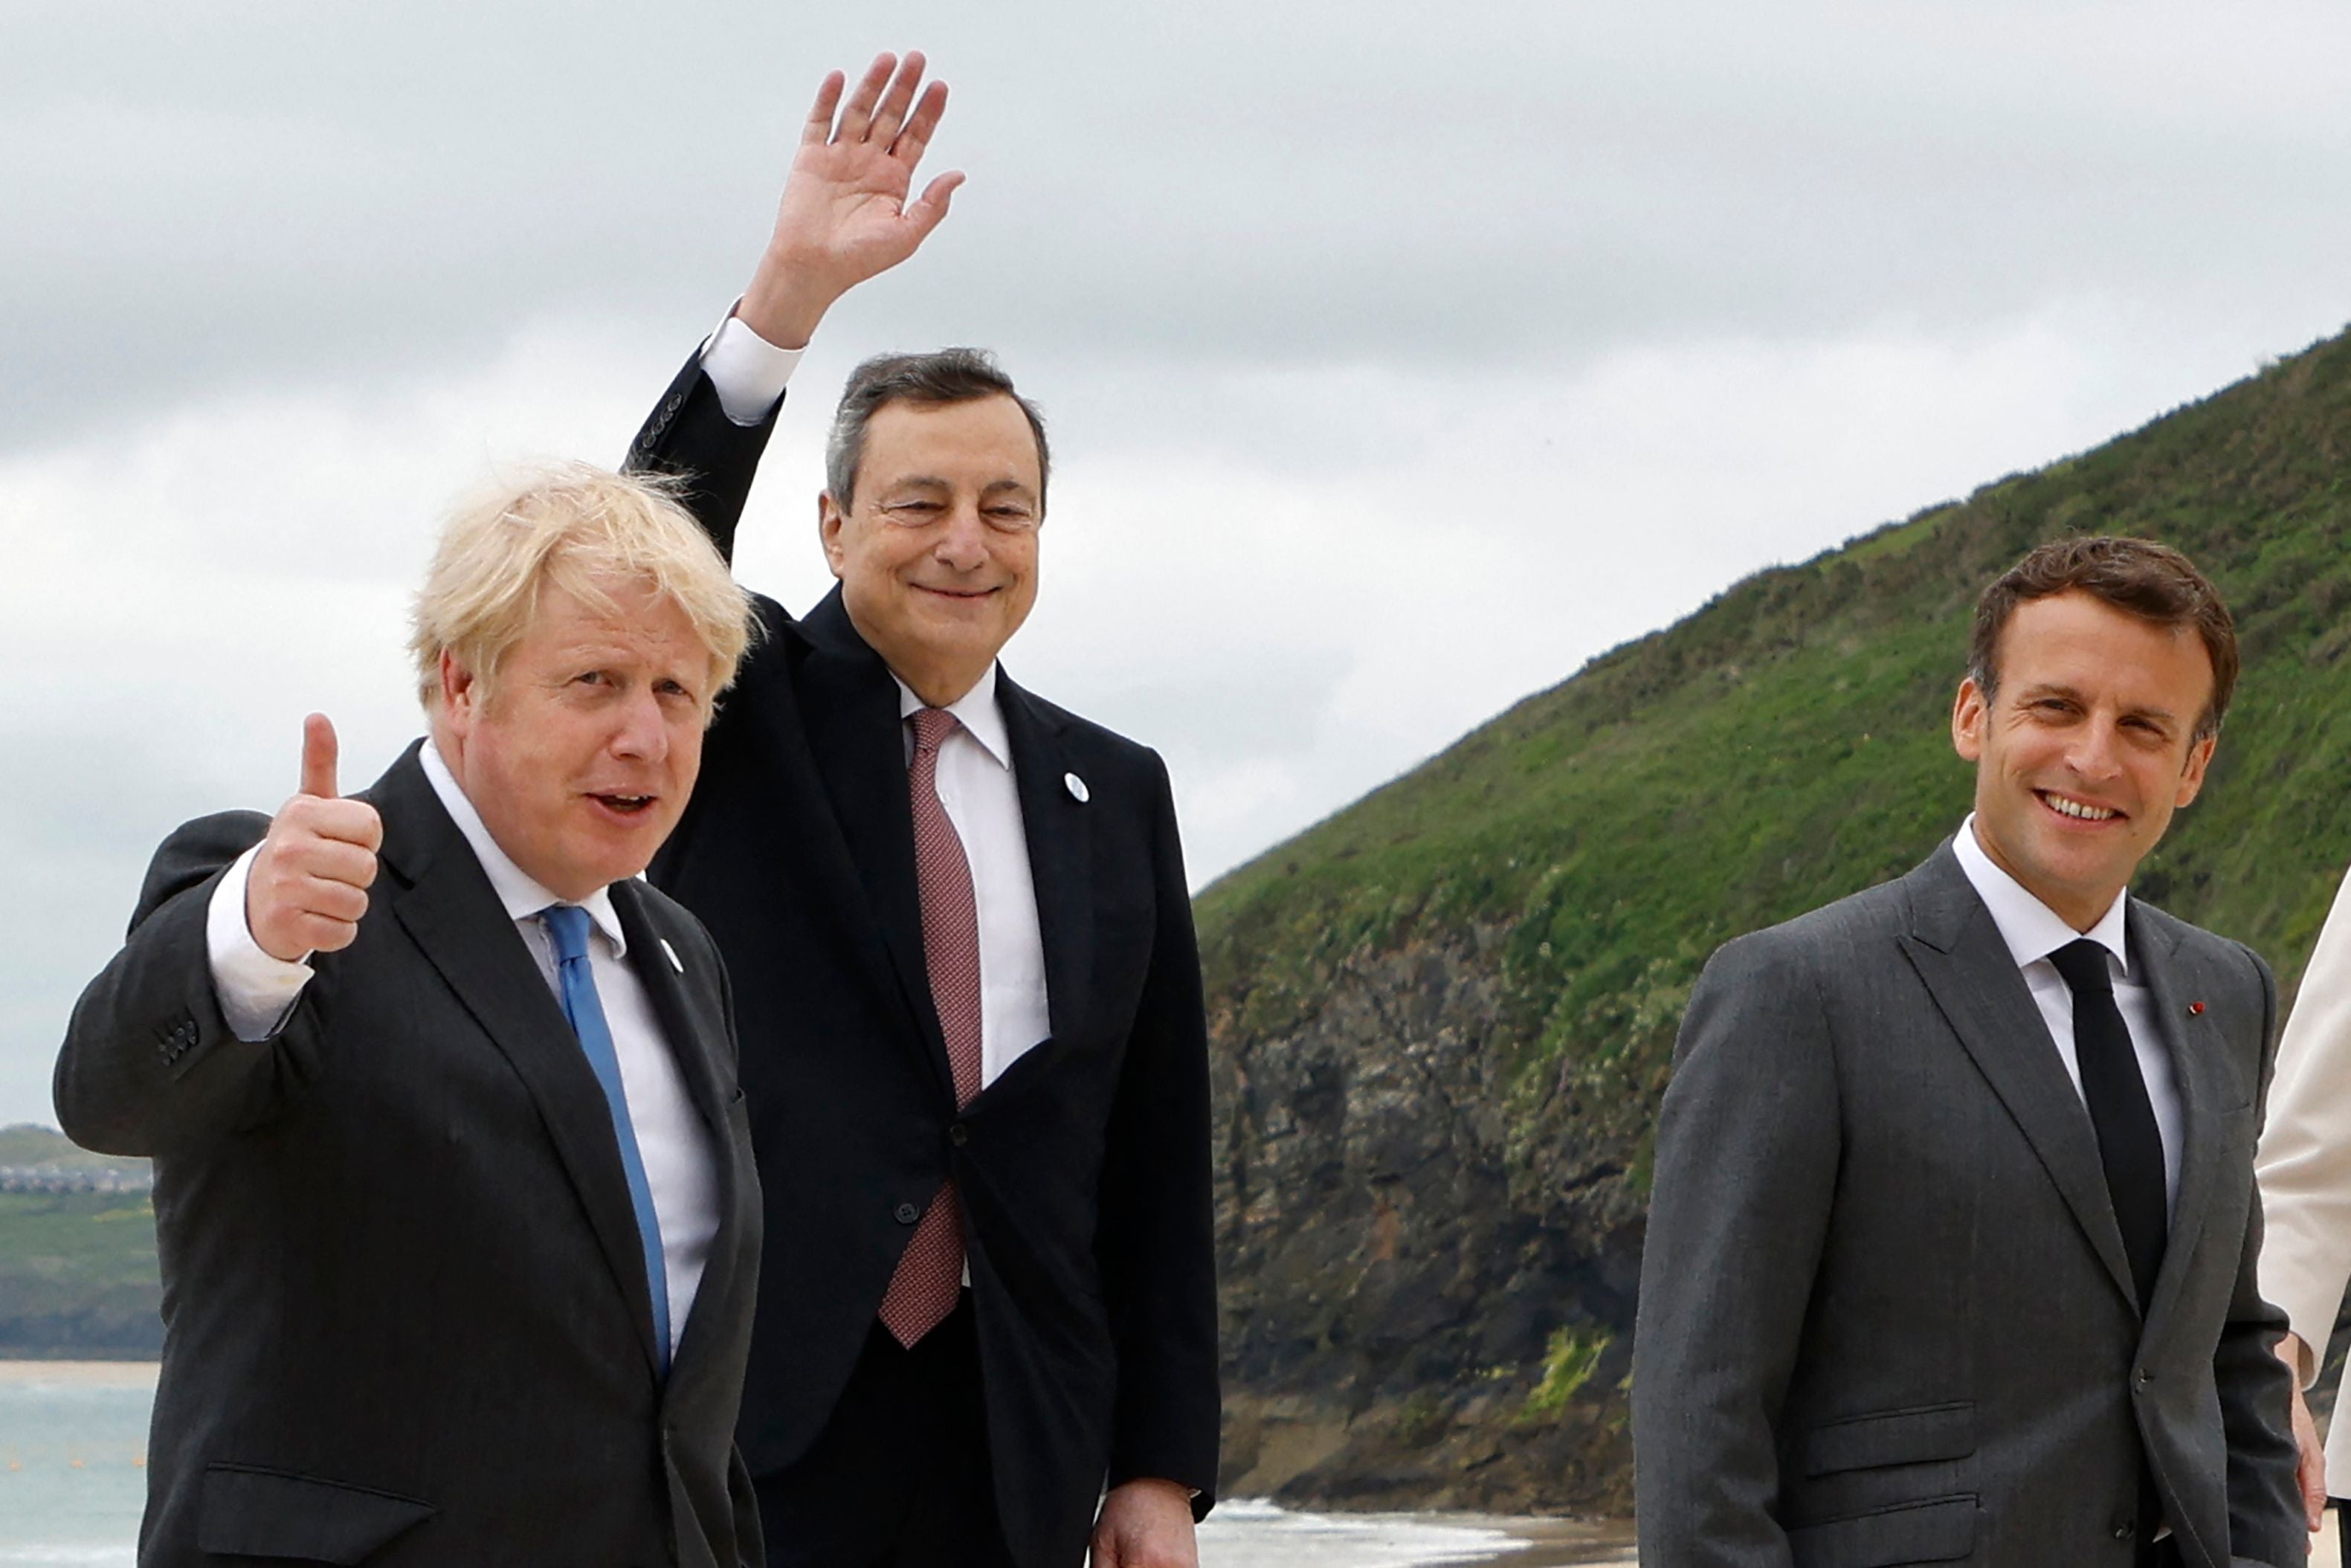 The UK is facing international criticism for its aid cuts as other G7 countries boost funding